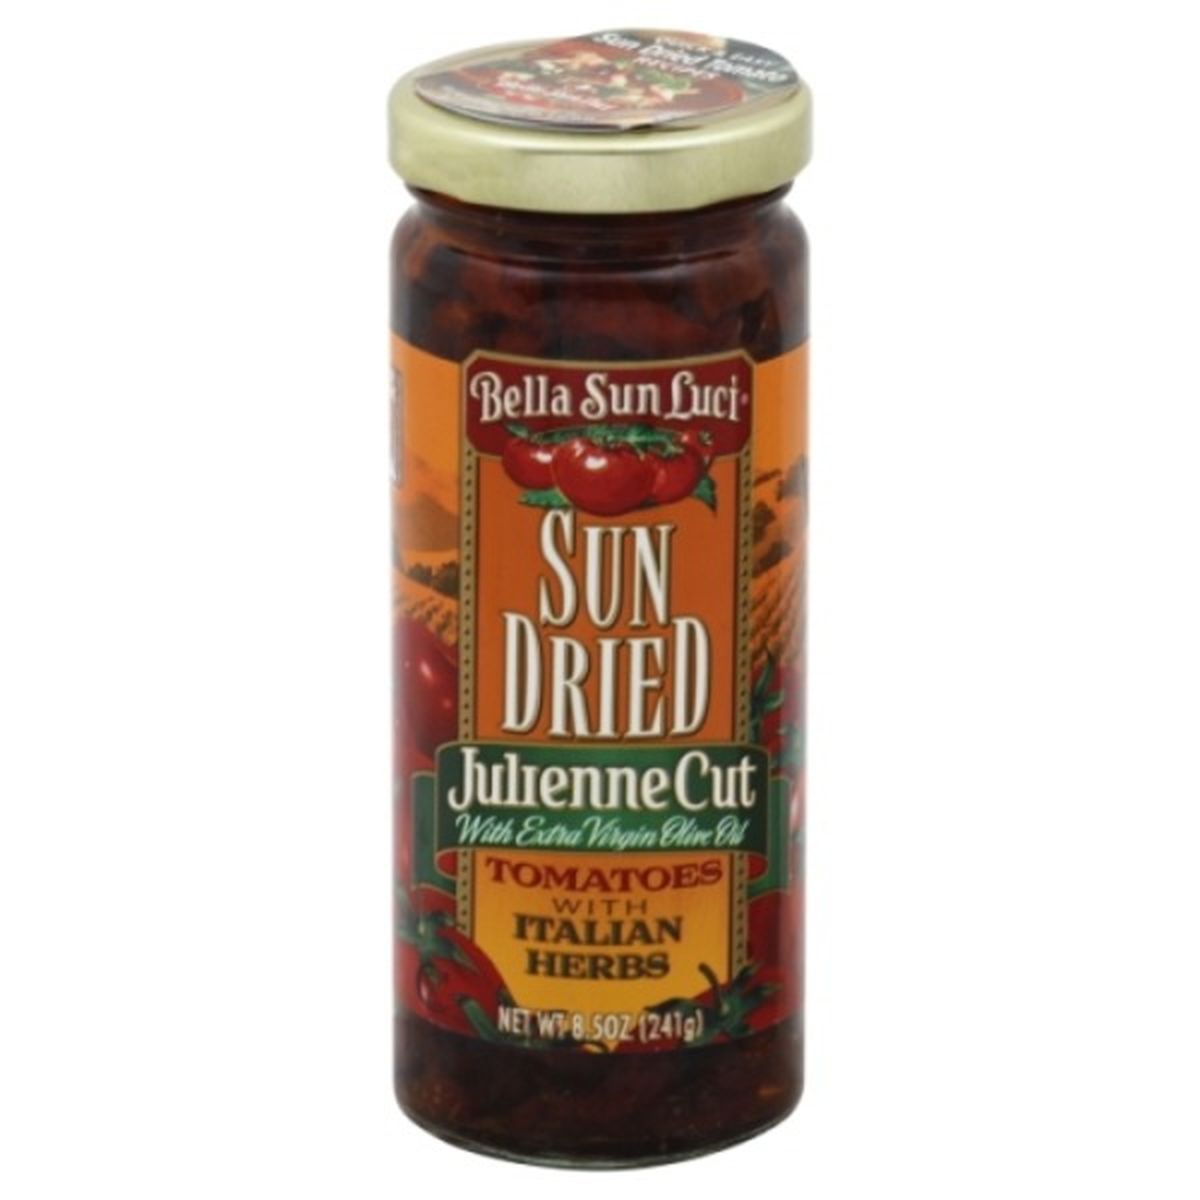 Calories in Bella Sun Luci Tomatoes, with Italian Herbs, Julienne Cut